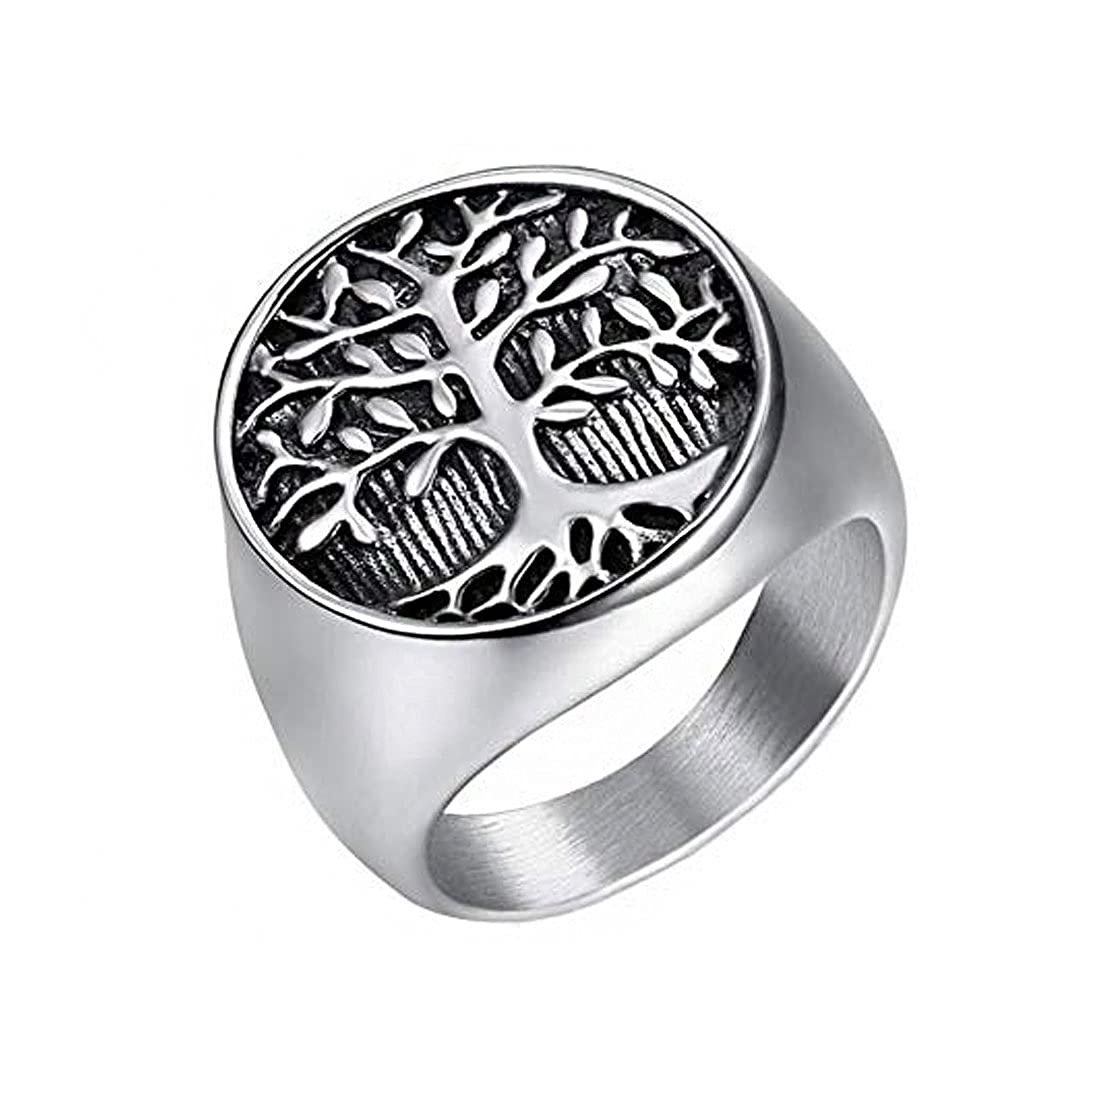 Yellow Chimes Rings for Men Stylish Silver toned Stainless Steel Tree Signet band Ring for Men and Boys.